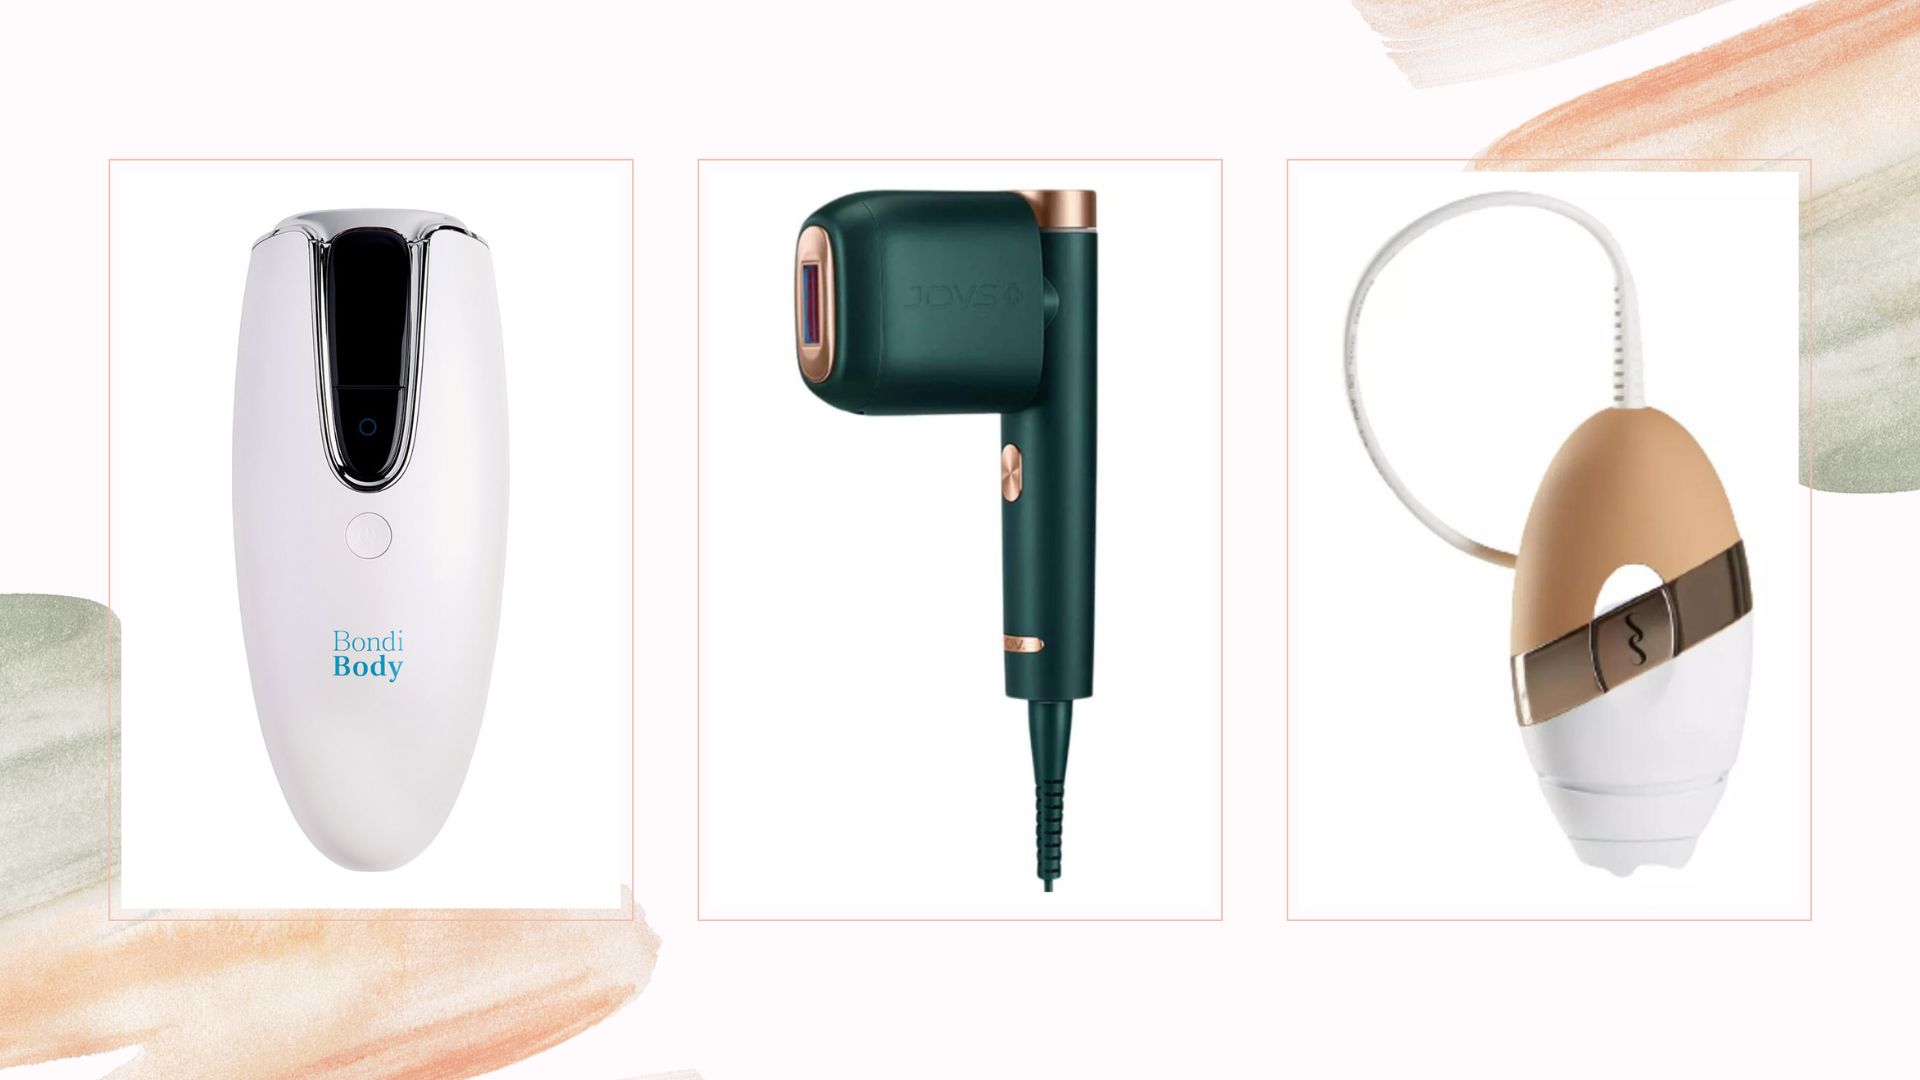 Braun's Silk Expert Pro 5 takes the guesswork out of home IPL treatments